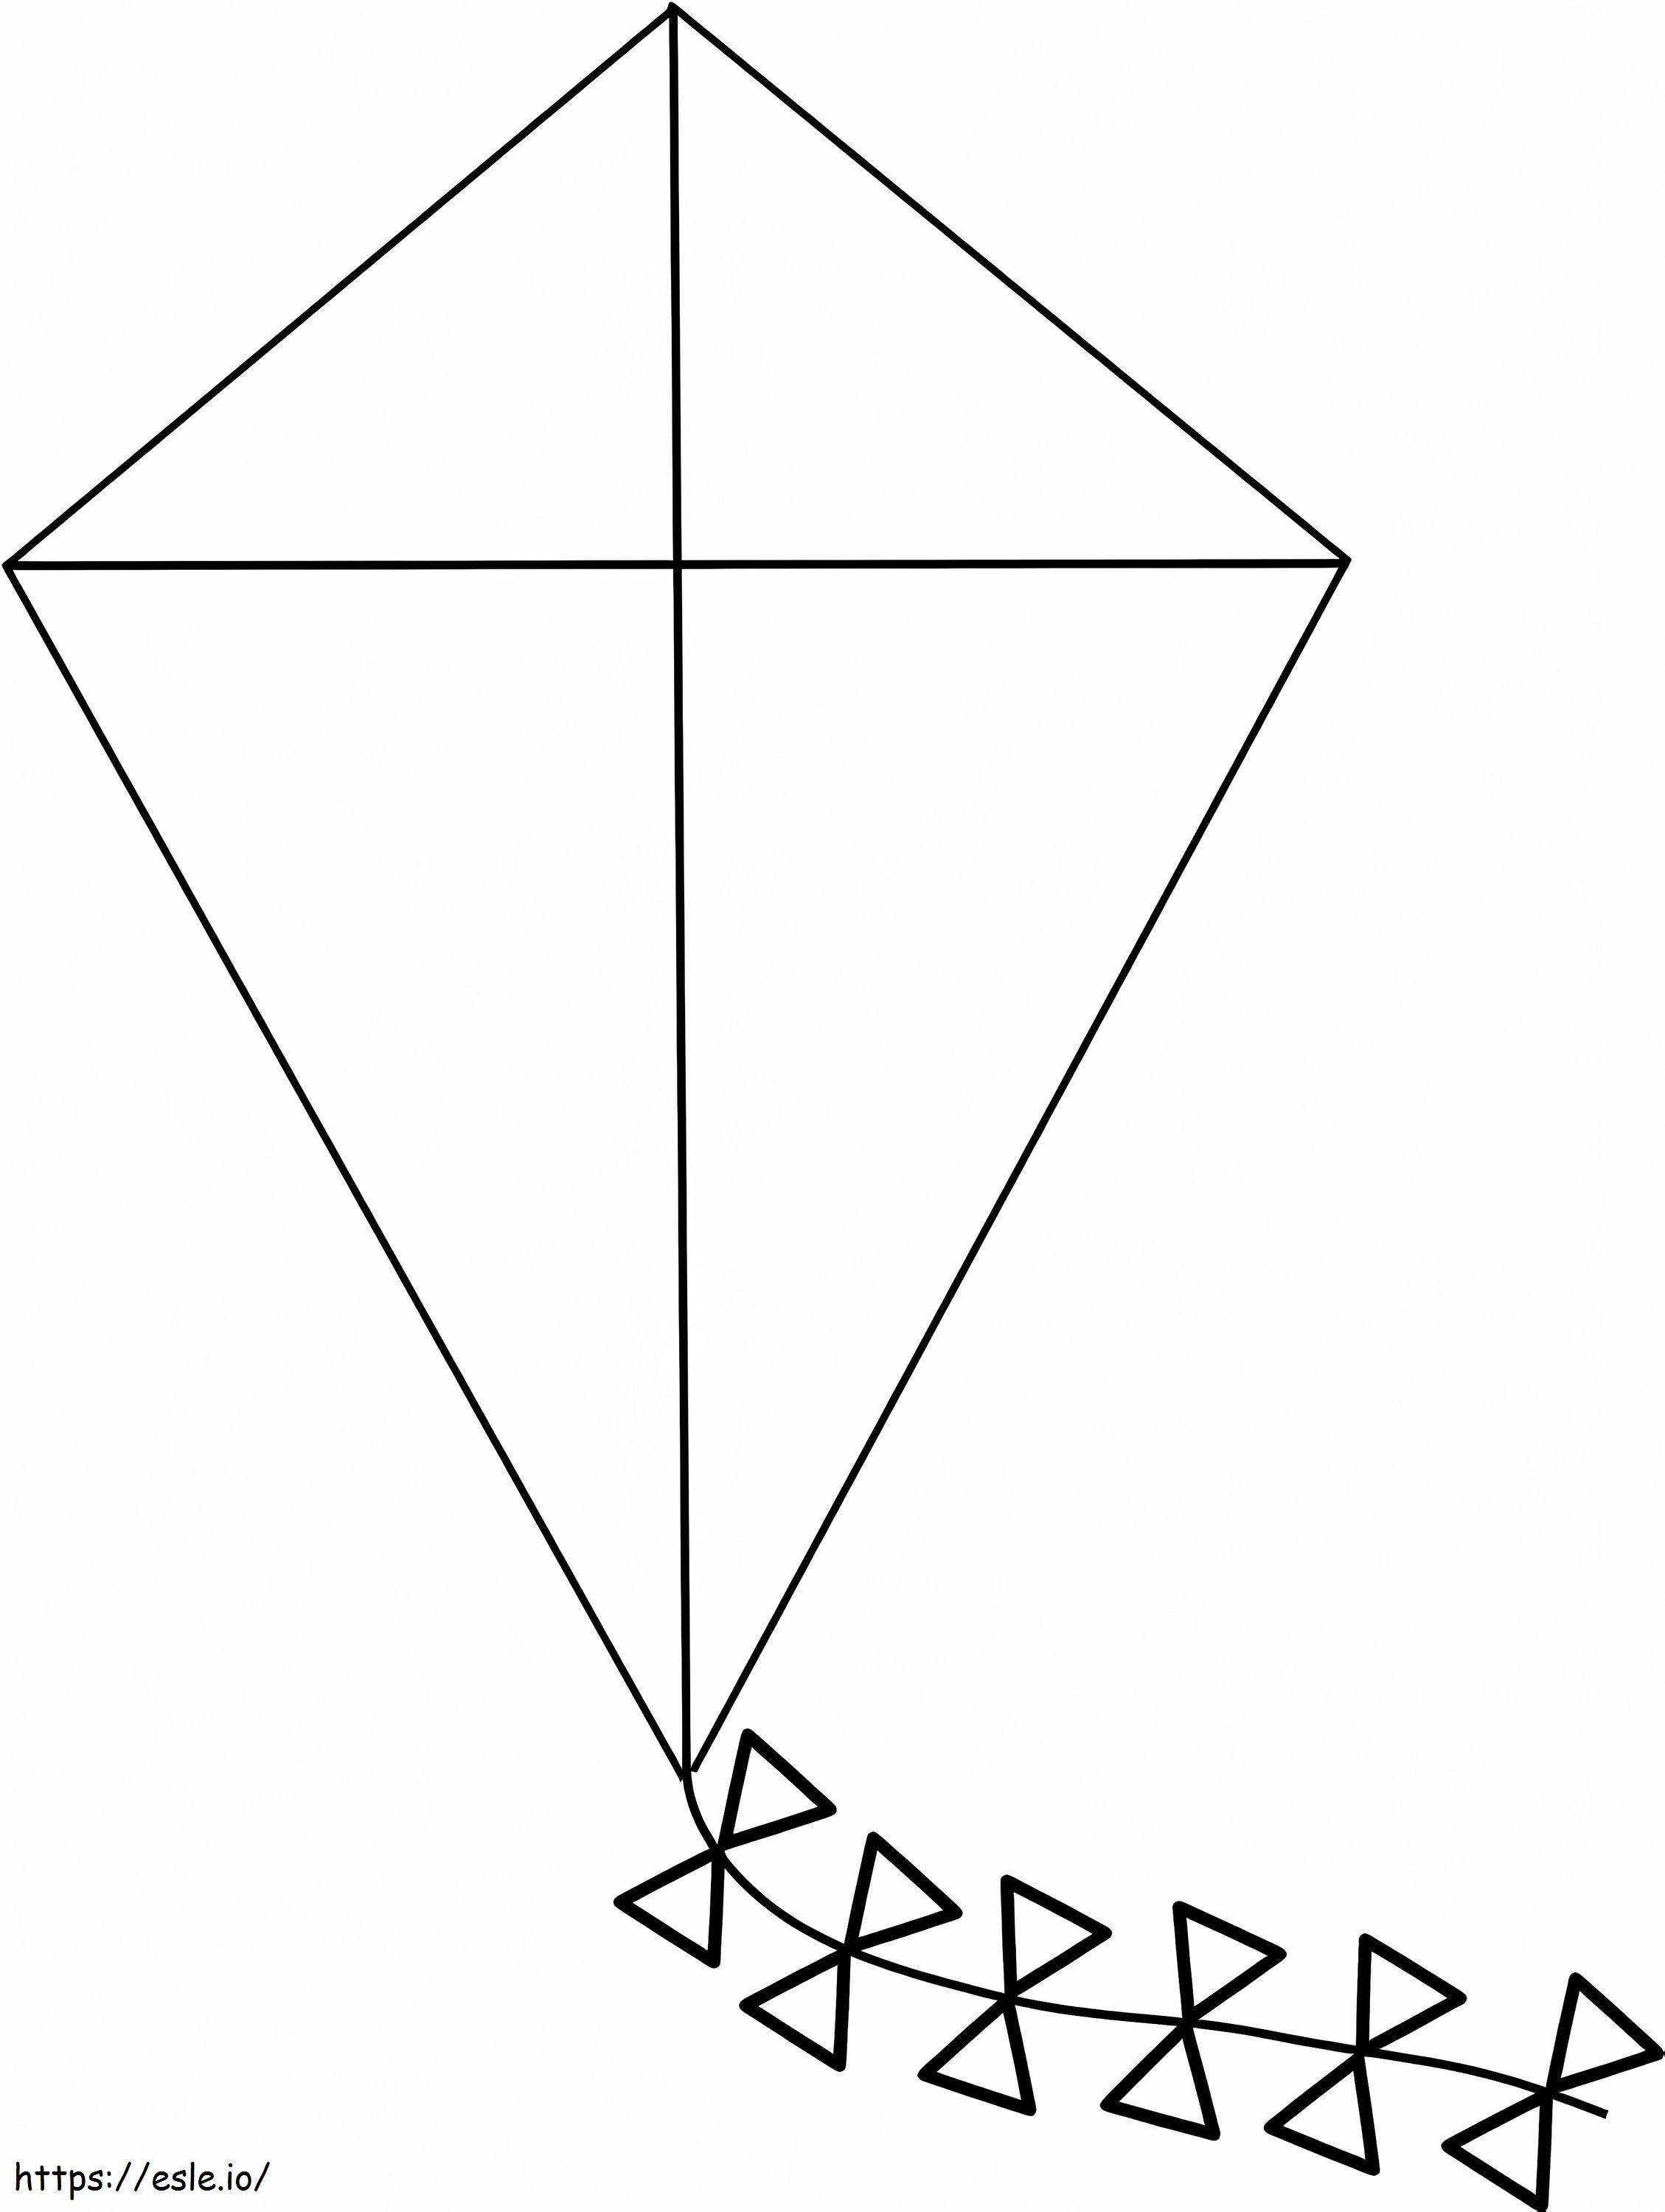 Simple Kite coloring page